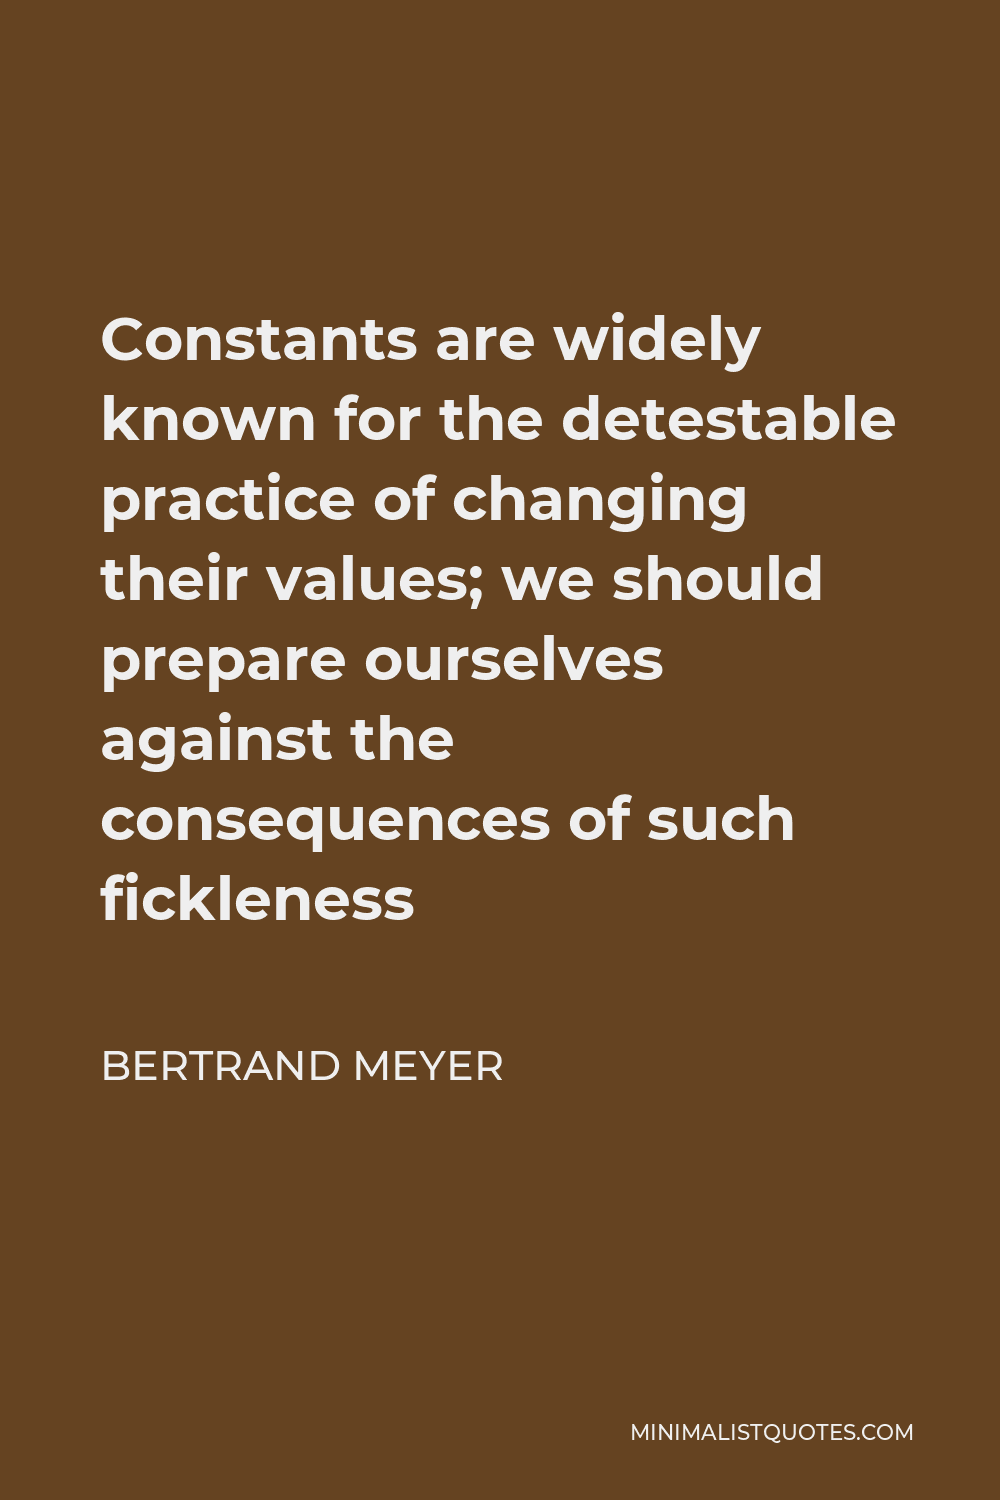 Bertrand Meyer Quote - Constants are widely known for the detestable practice of changing their values; we should prepare ourselves against the consequences of such fickleness